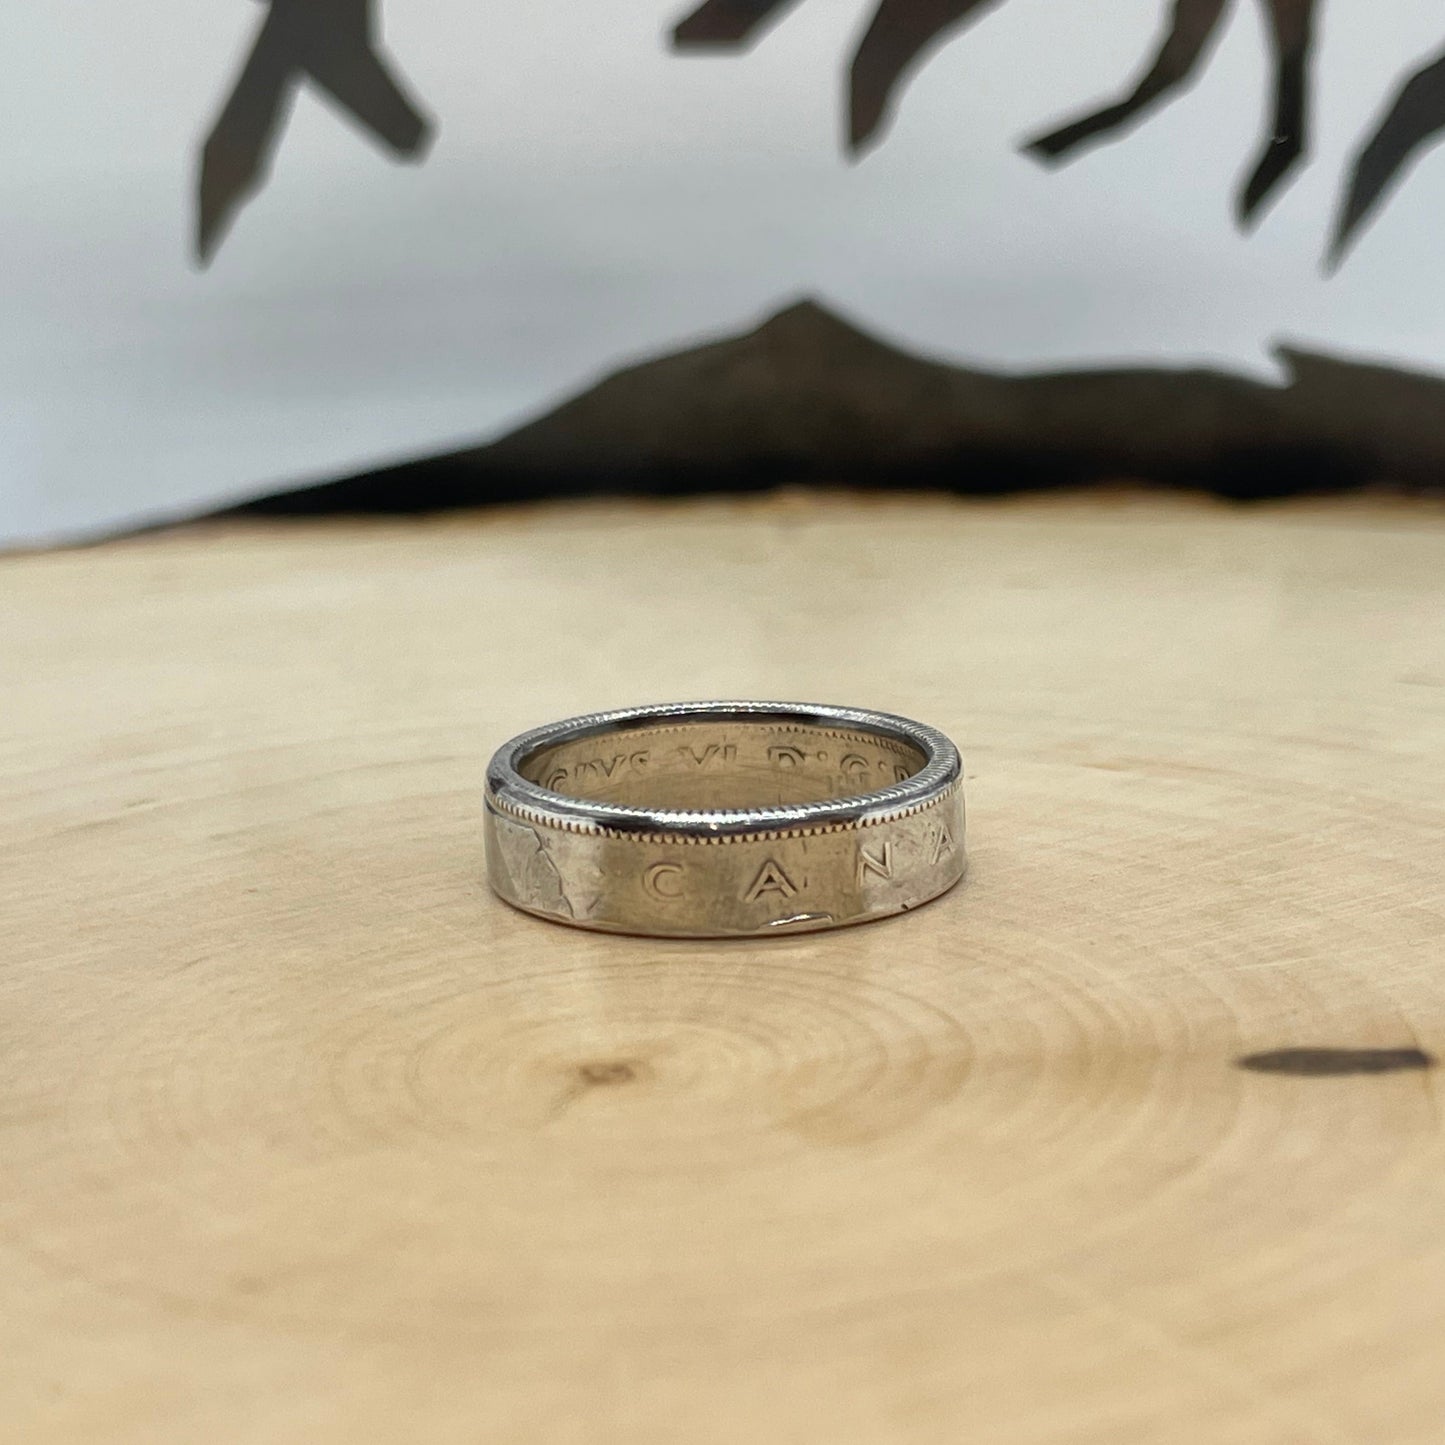 Canada 25 Cents Silver Ring